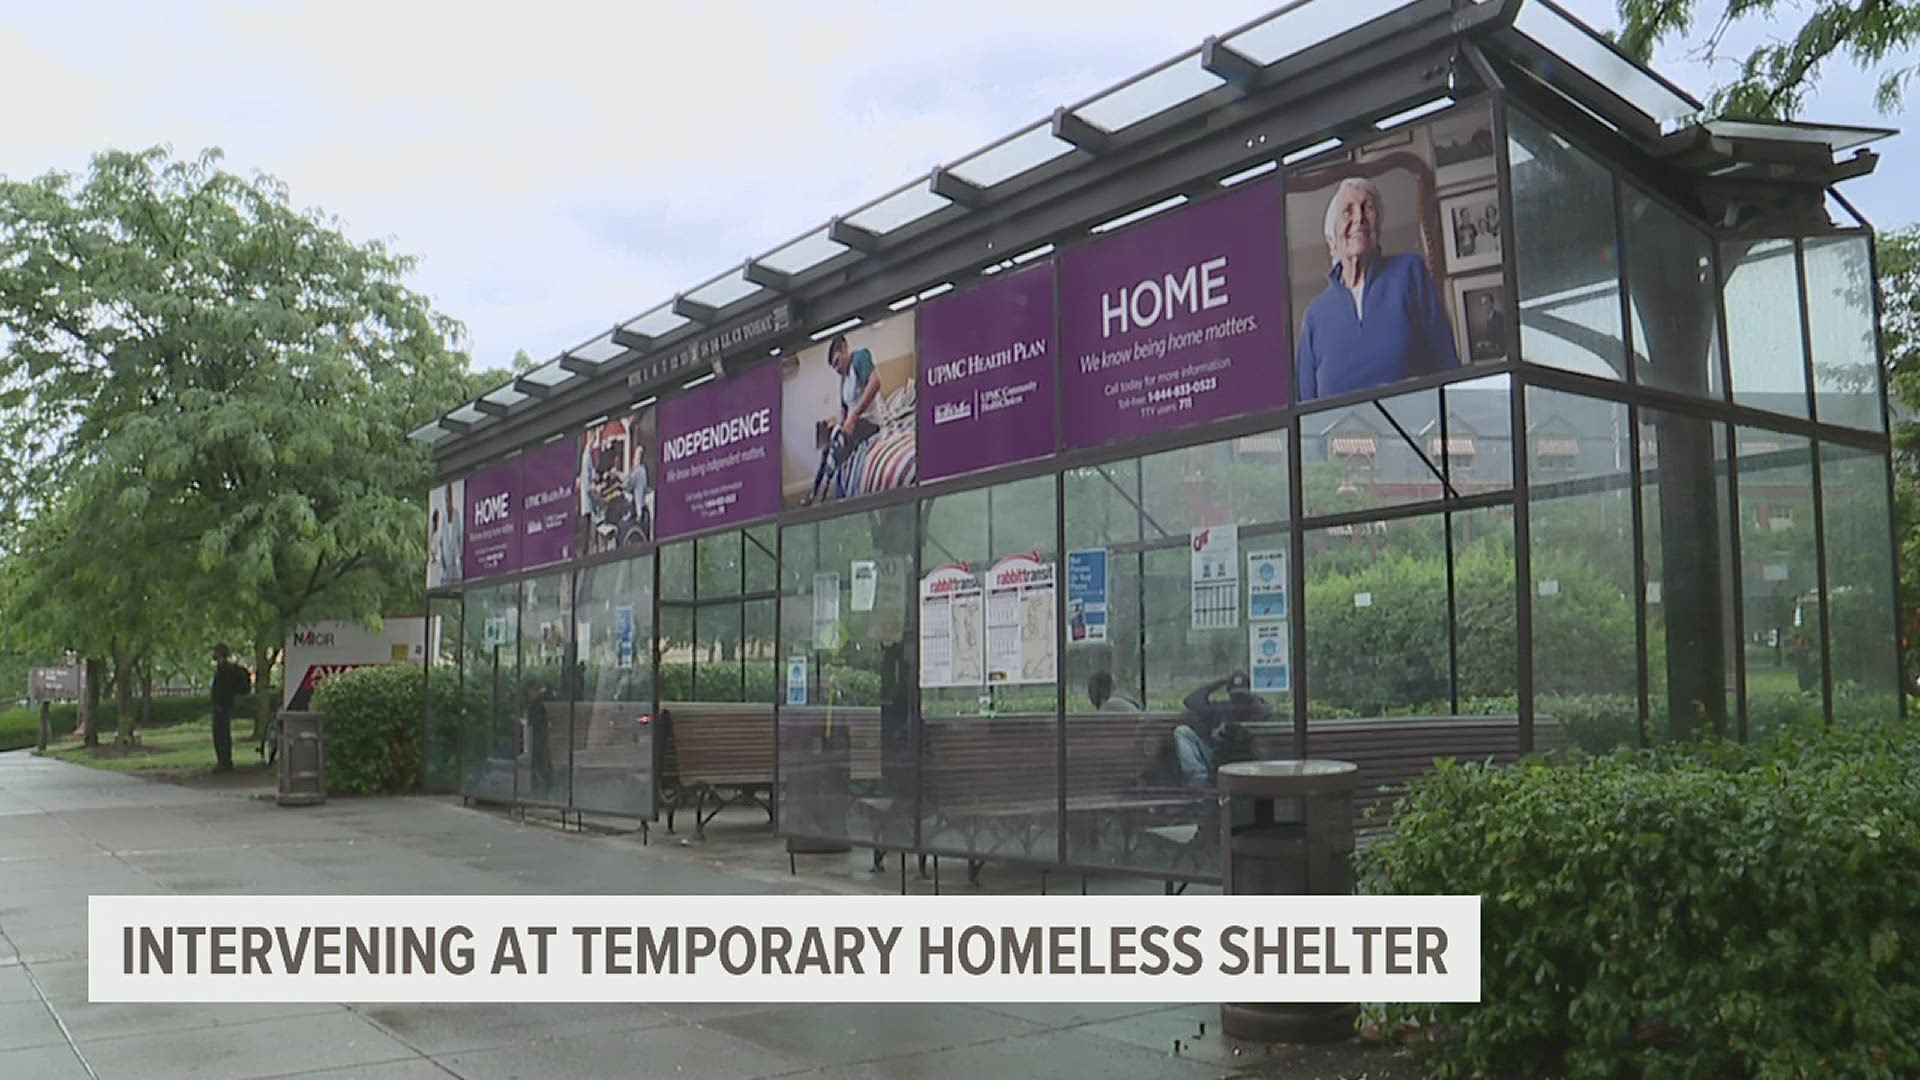 State agencies recently intervened at a bus shelter in downtown Harrisburg that had become unusable for bus riders due to several homeless people living there.